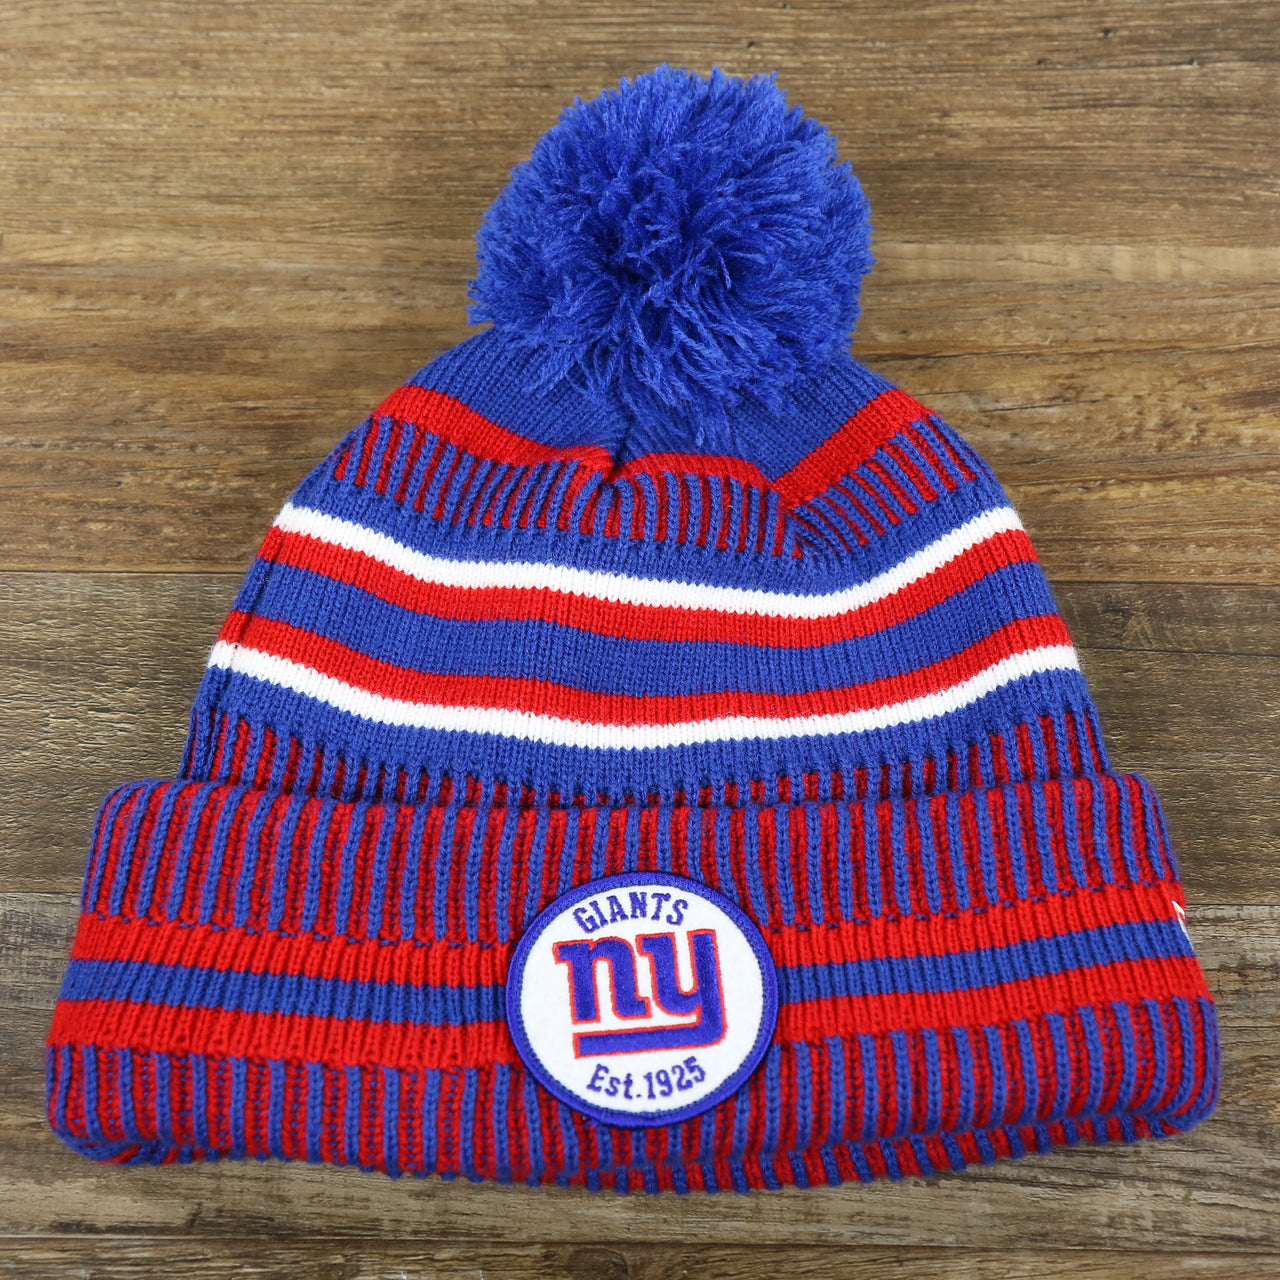 The front of the New York Giants On Field Sideline Cuffed Winter Knit Pom Pom Beanie | Red Winter Beanie